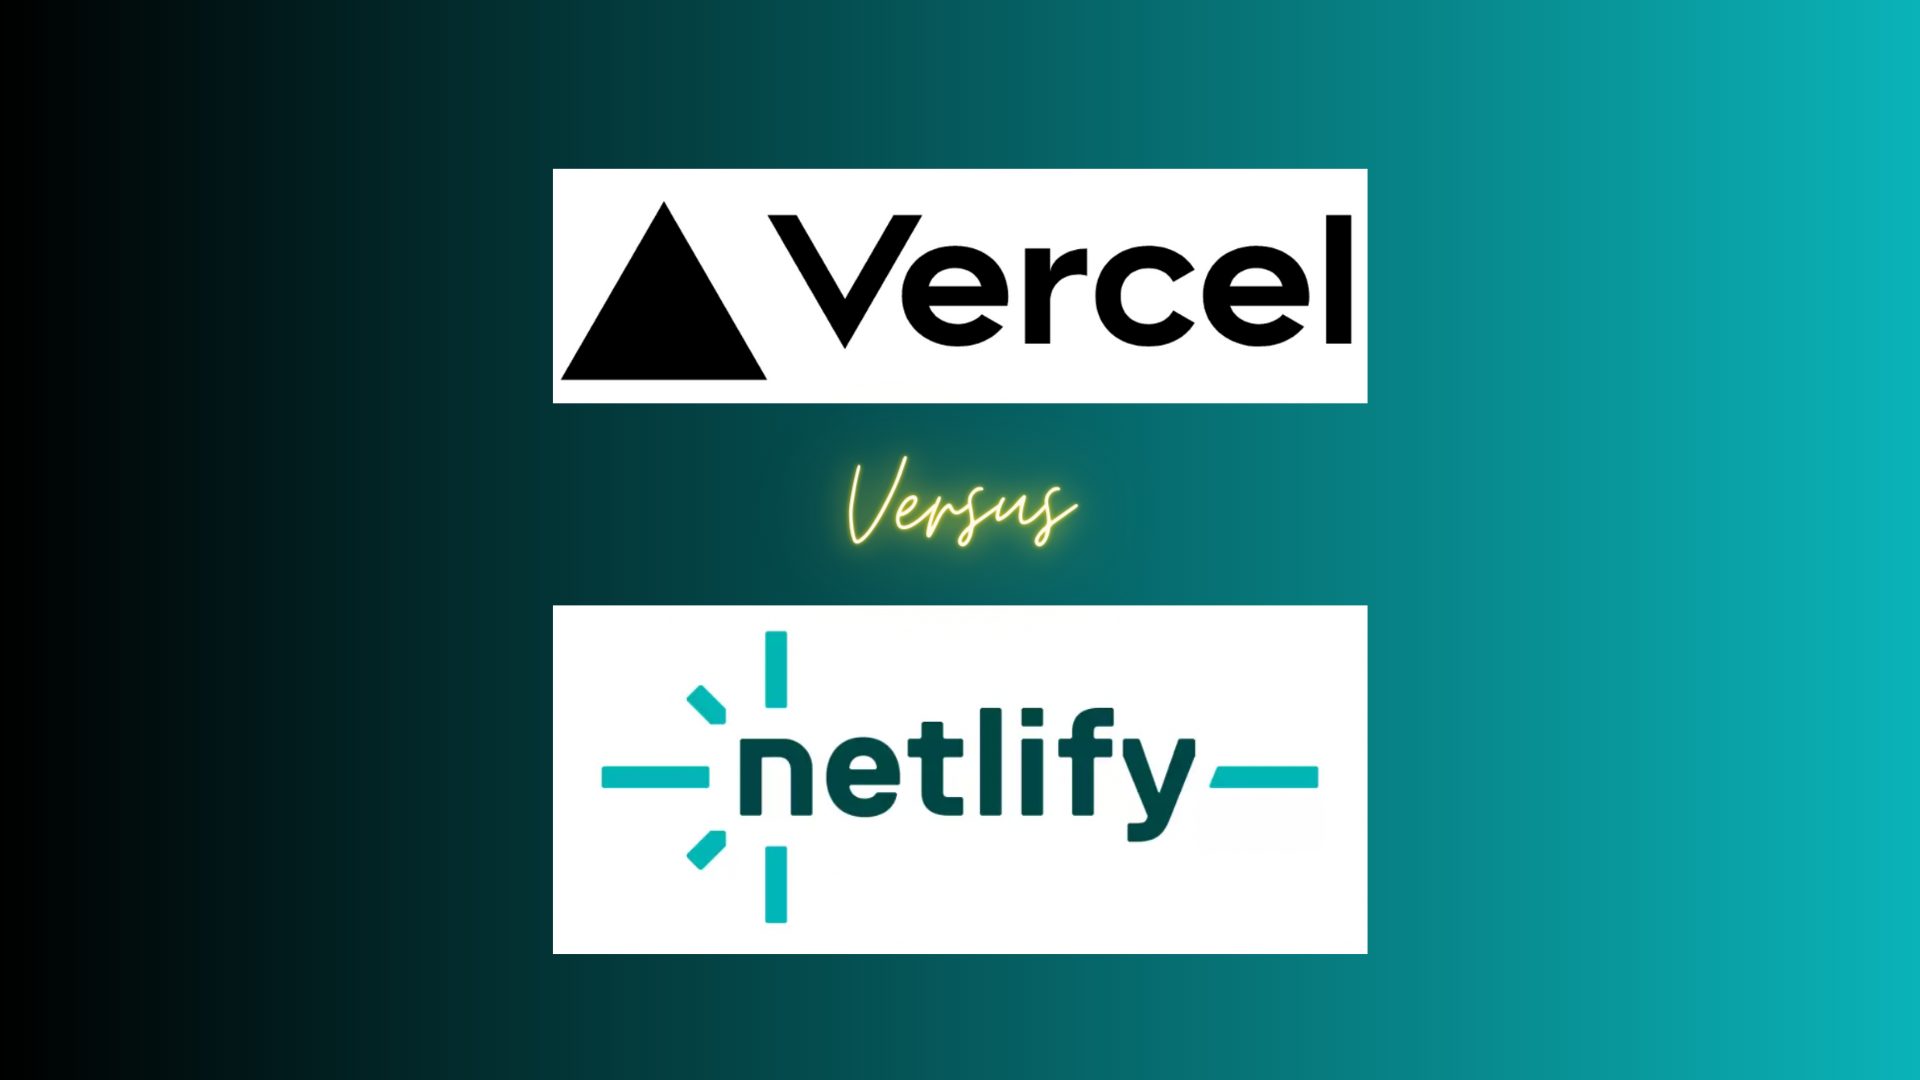 Vercel versus Netlify with logos on a blended black and green background.